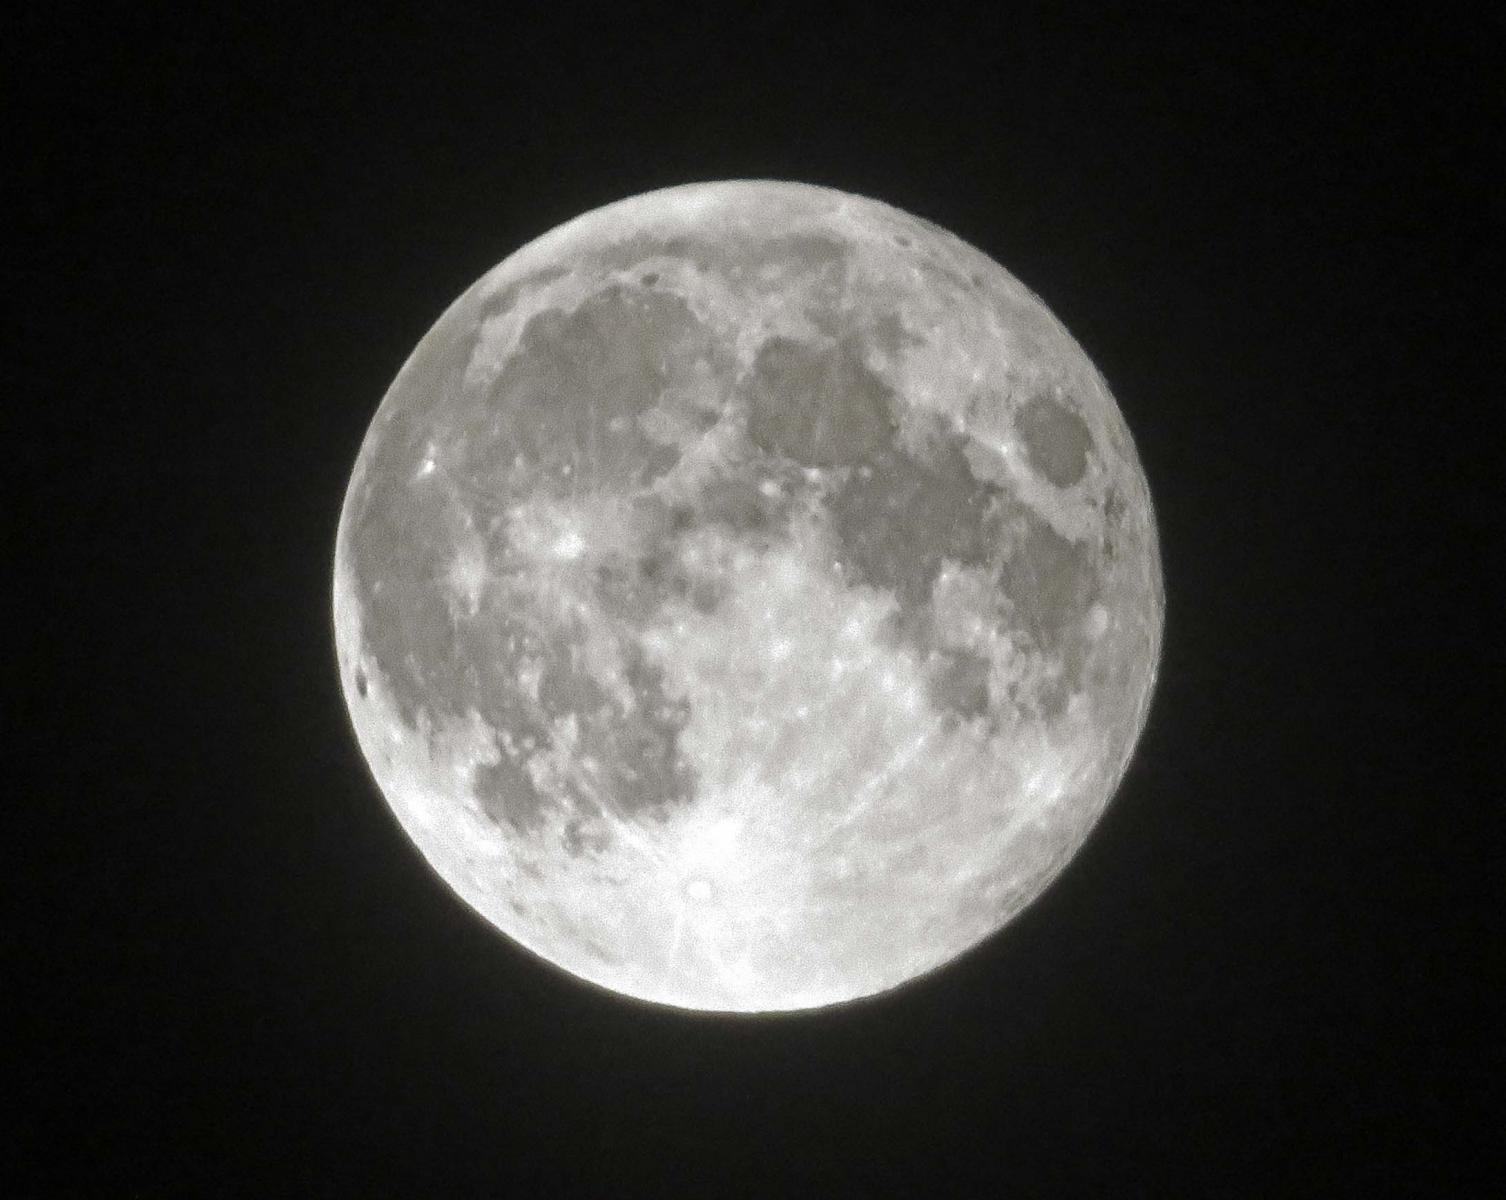 The June Full Moon Lunar Observing and Imaging Cloudy Nights